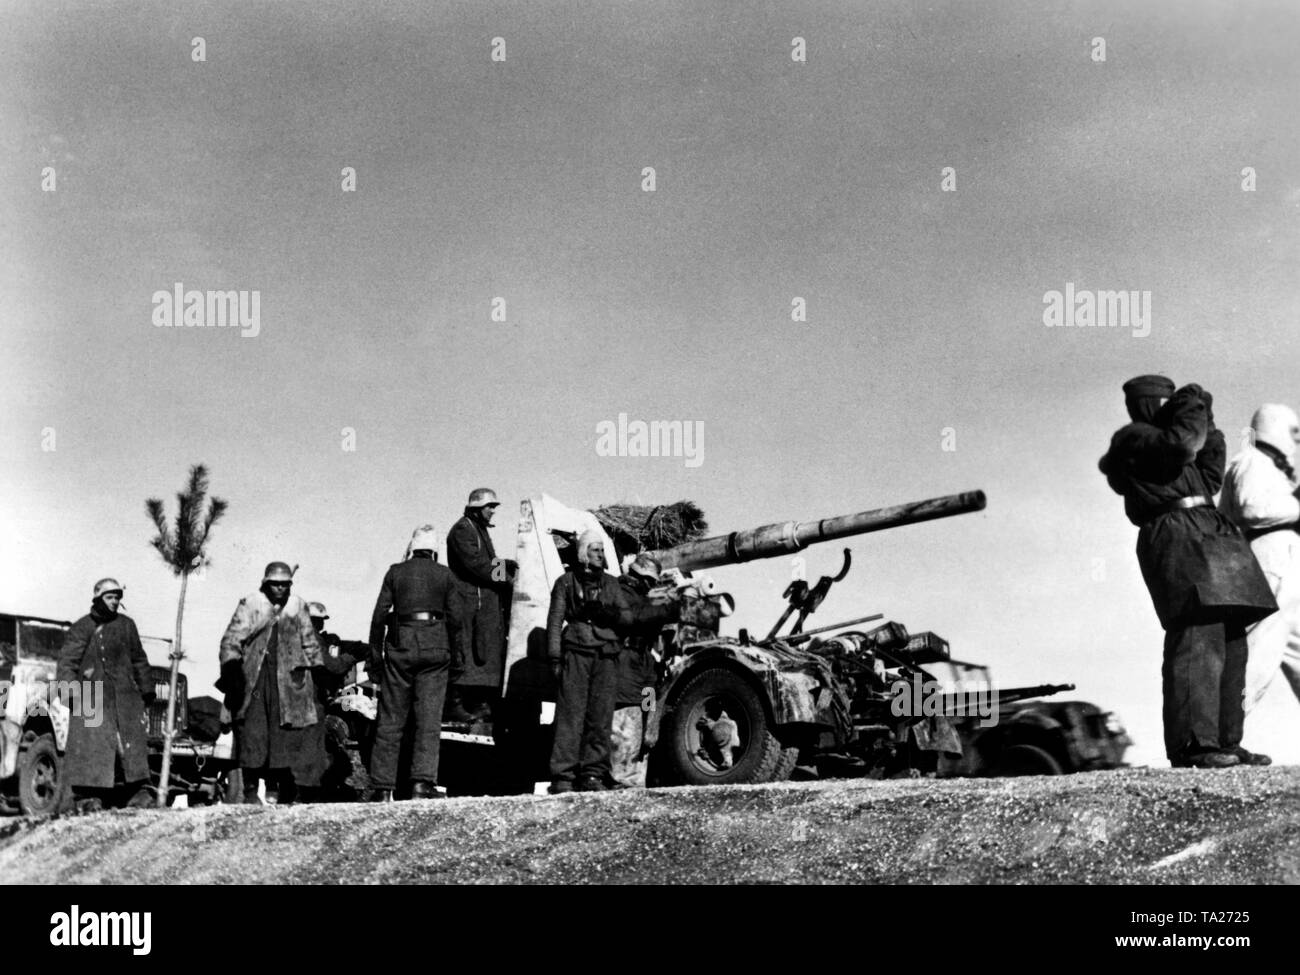 Cm Flak High Resolution Stock Photography And Images Alamy